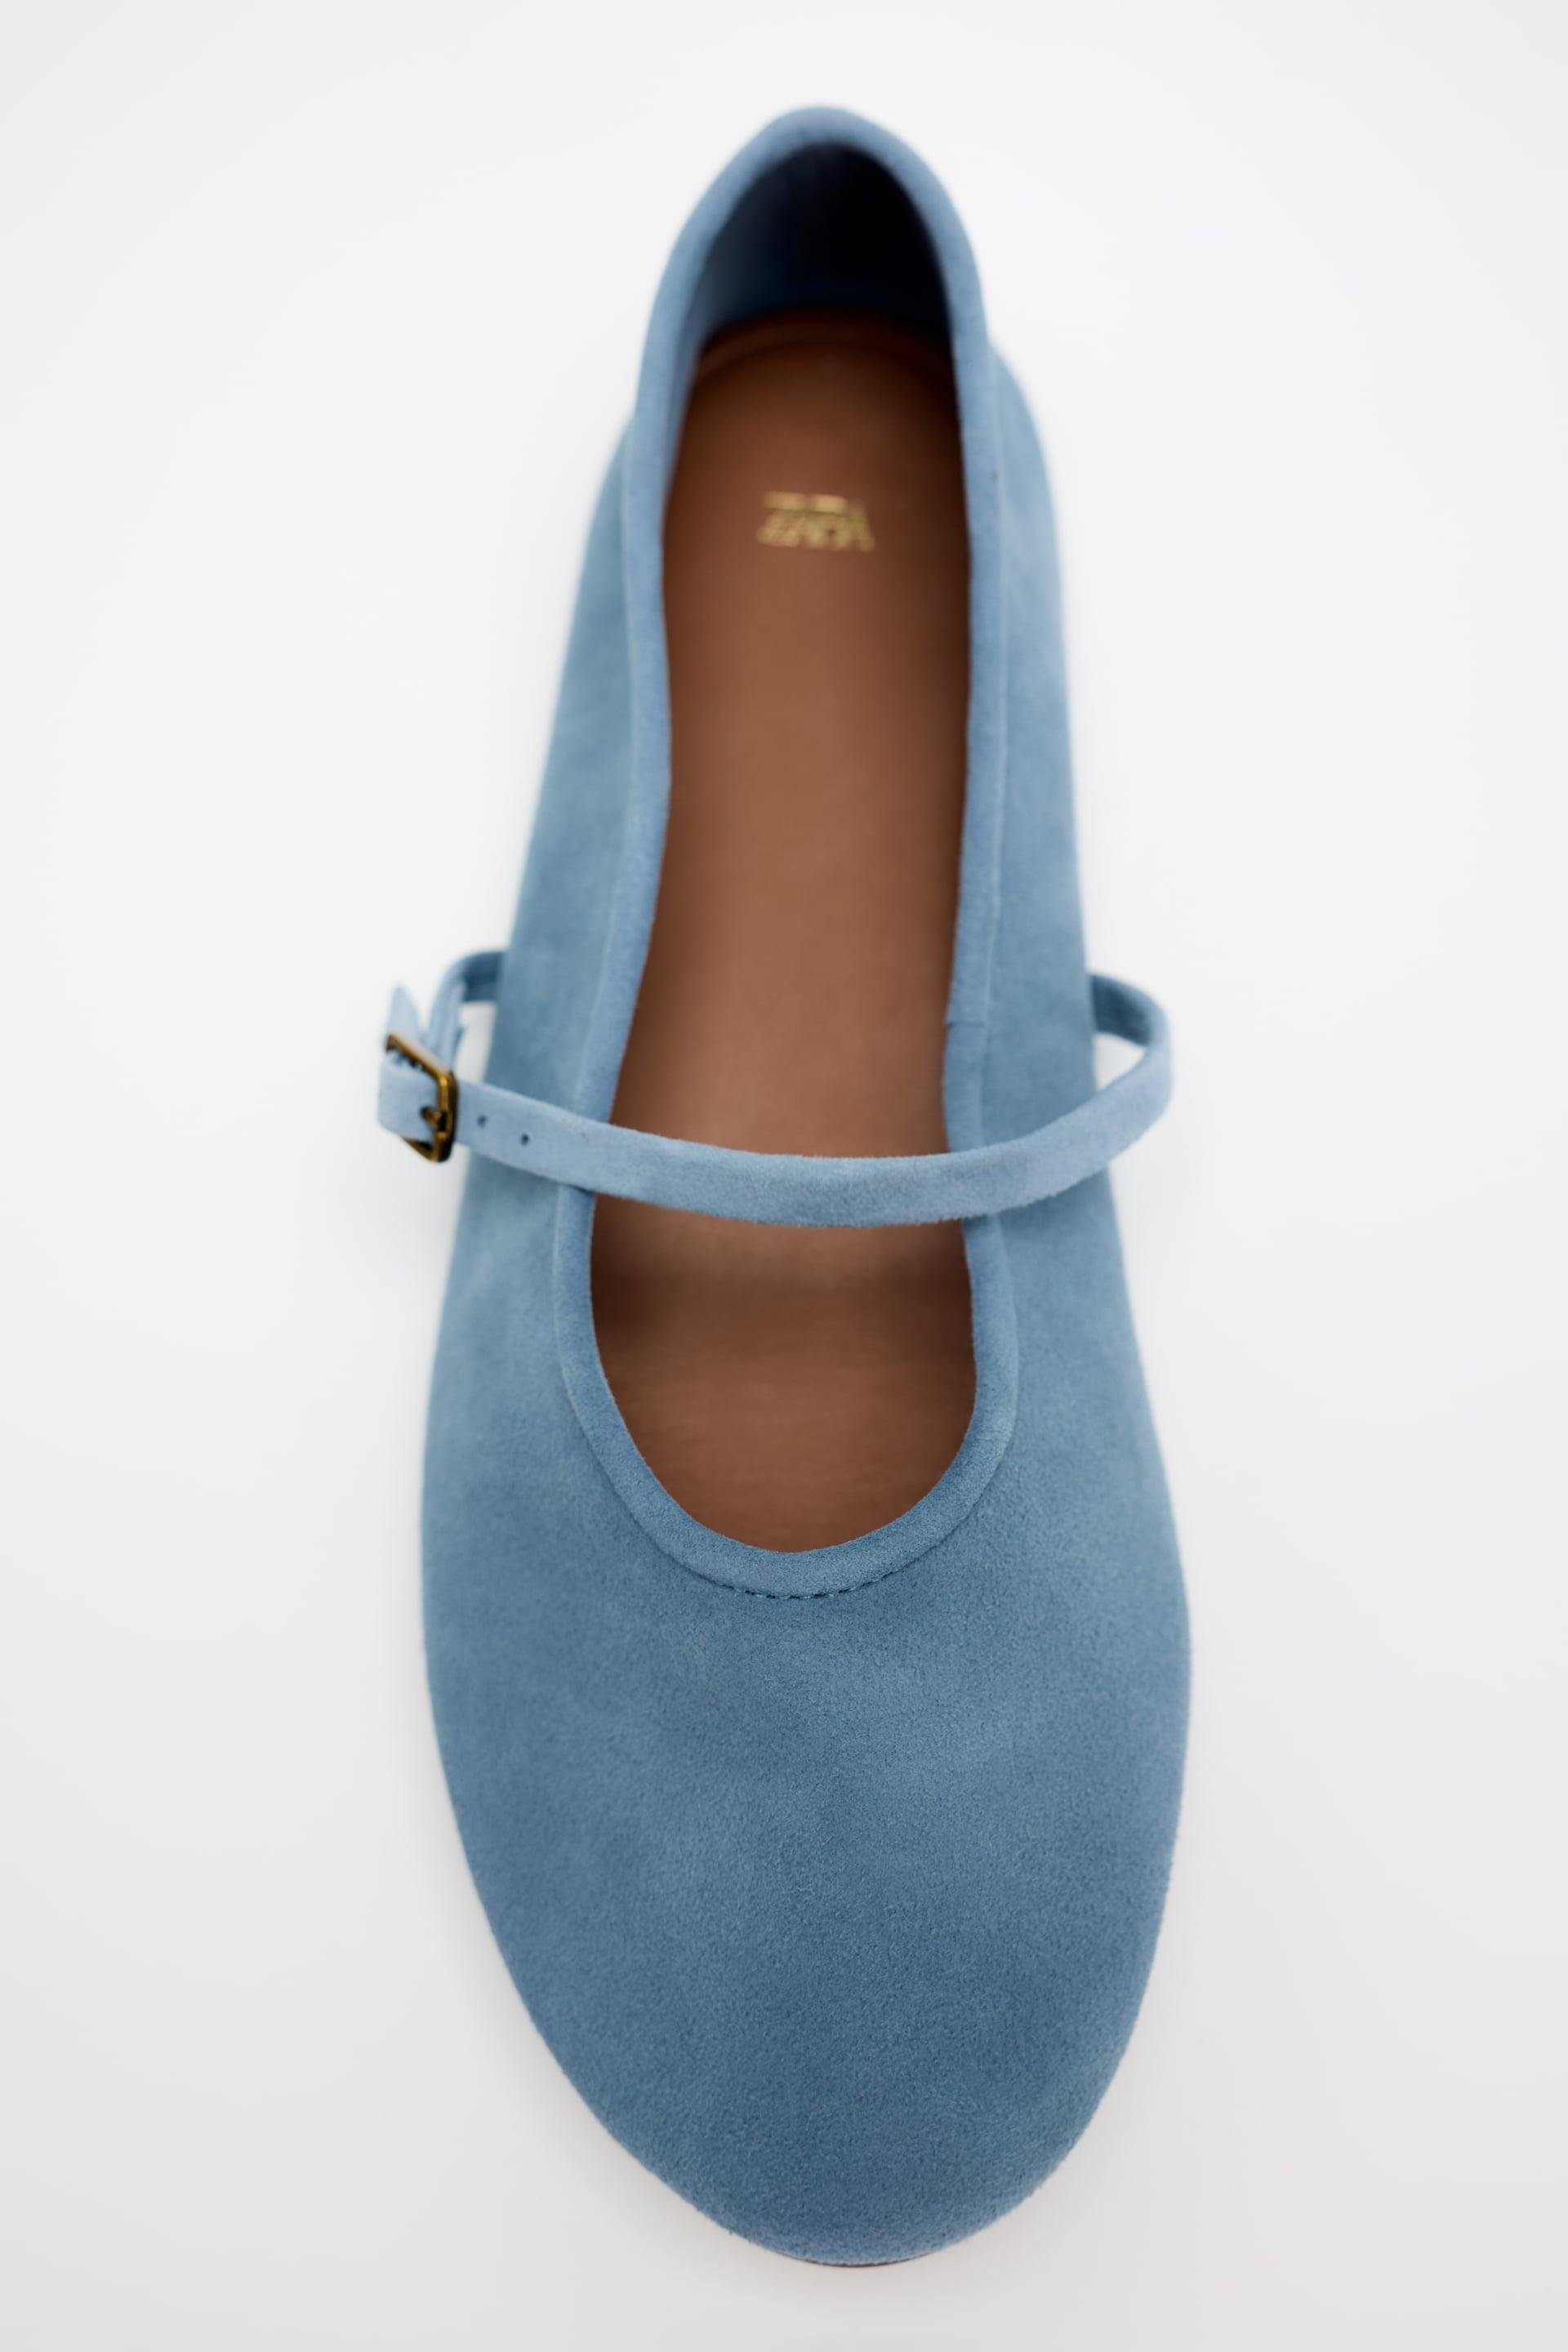 BUCKLED SOFT SUEDE MARY JANES by ZARA